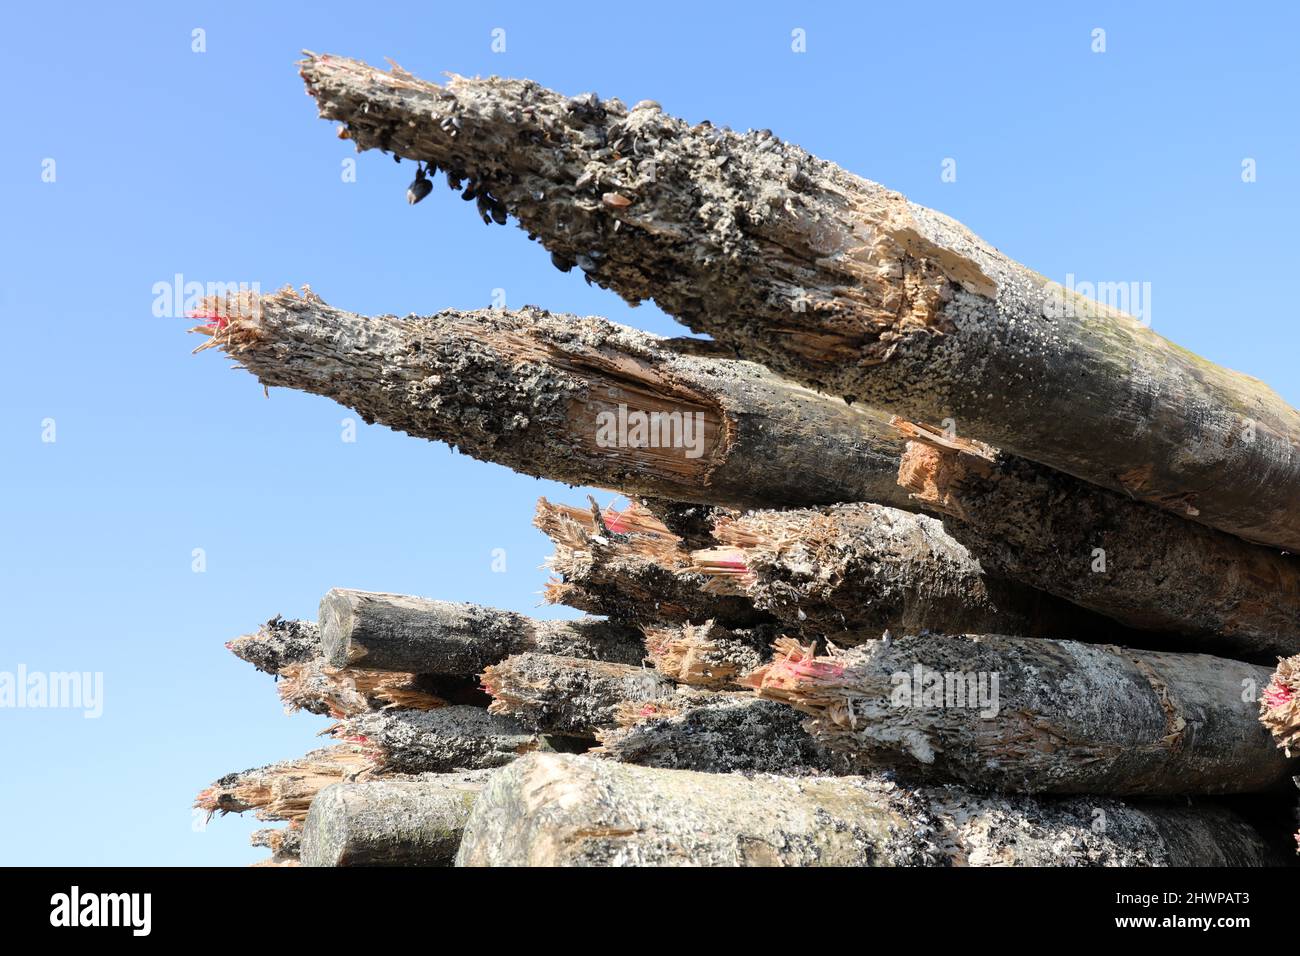 Wustrow, Germany. 02nd Mar, 2022. Behind the dike of the Baltic seaside resort of Wustrow on the Fischland peninsula are old groynes that have been destroyed by the ship borer (Teredo navalis). The replacement of the 21 groynes will cost 1.9 million euros and last from September 2021 to May 2022. The new groynes are built seaward from certified tropical wood that can resist the ship borer. Credit: Bernd Wüstneck/dpa-Zentralbild/ZB/dpa/Alamy Live News Stock Photo